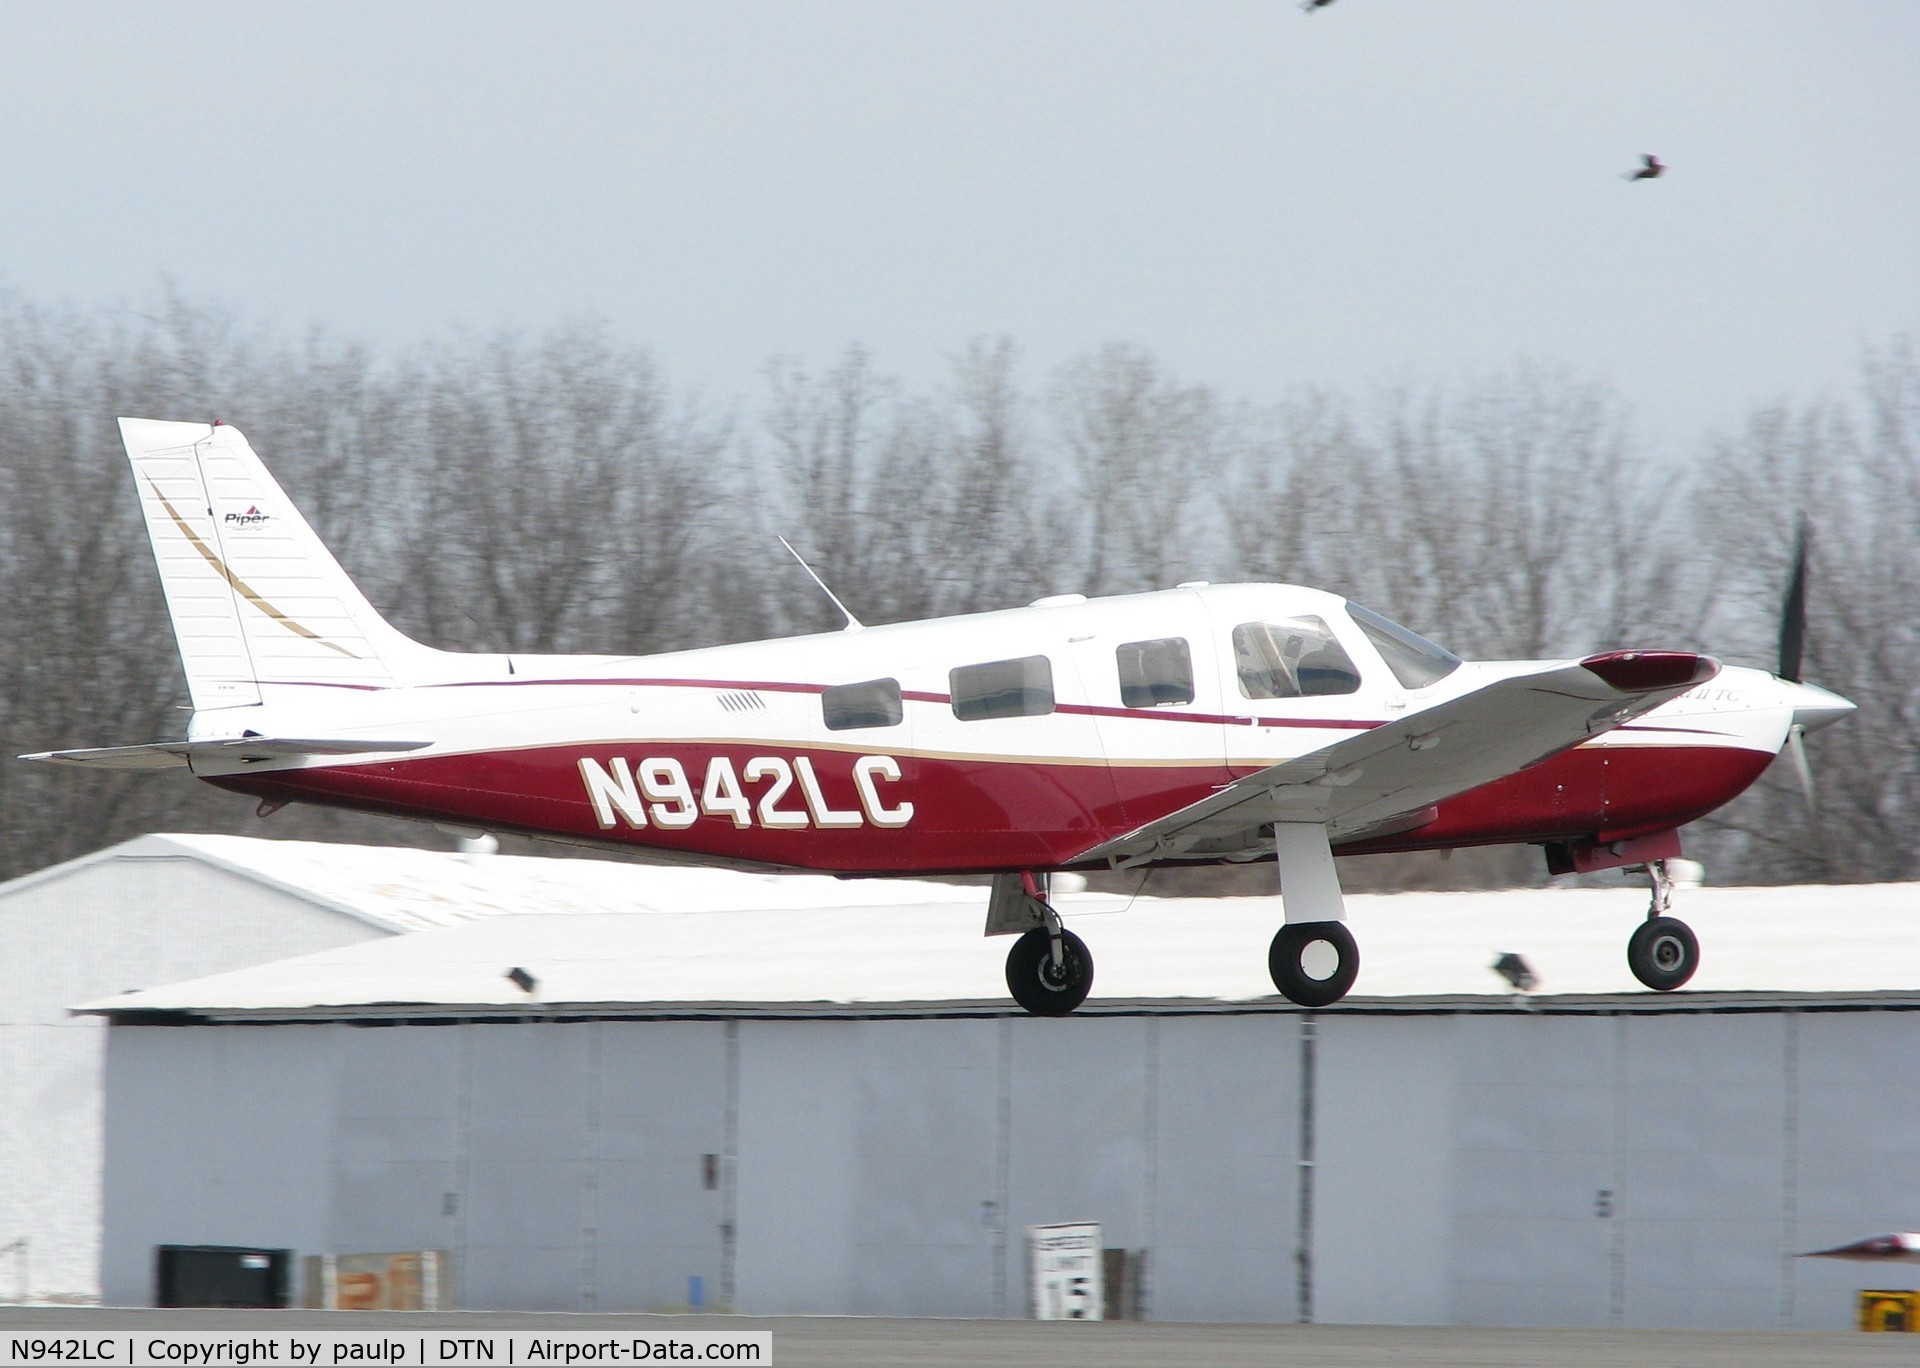 N942LC, 2001 Piper PA-32R-301T Turbo Saratoga C/N 3257265, Touching down at Downtown Shreveport.